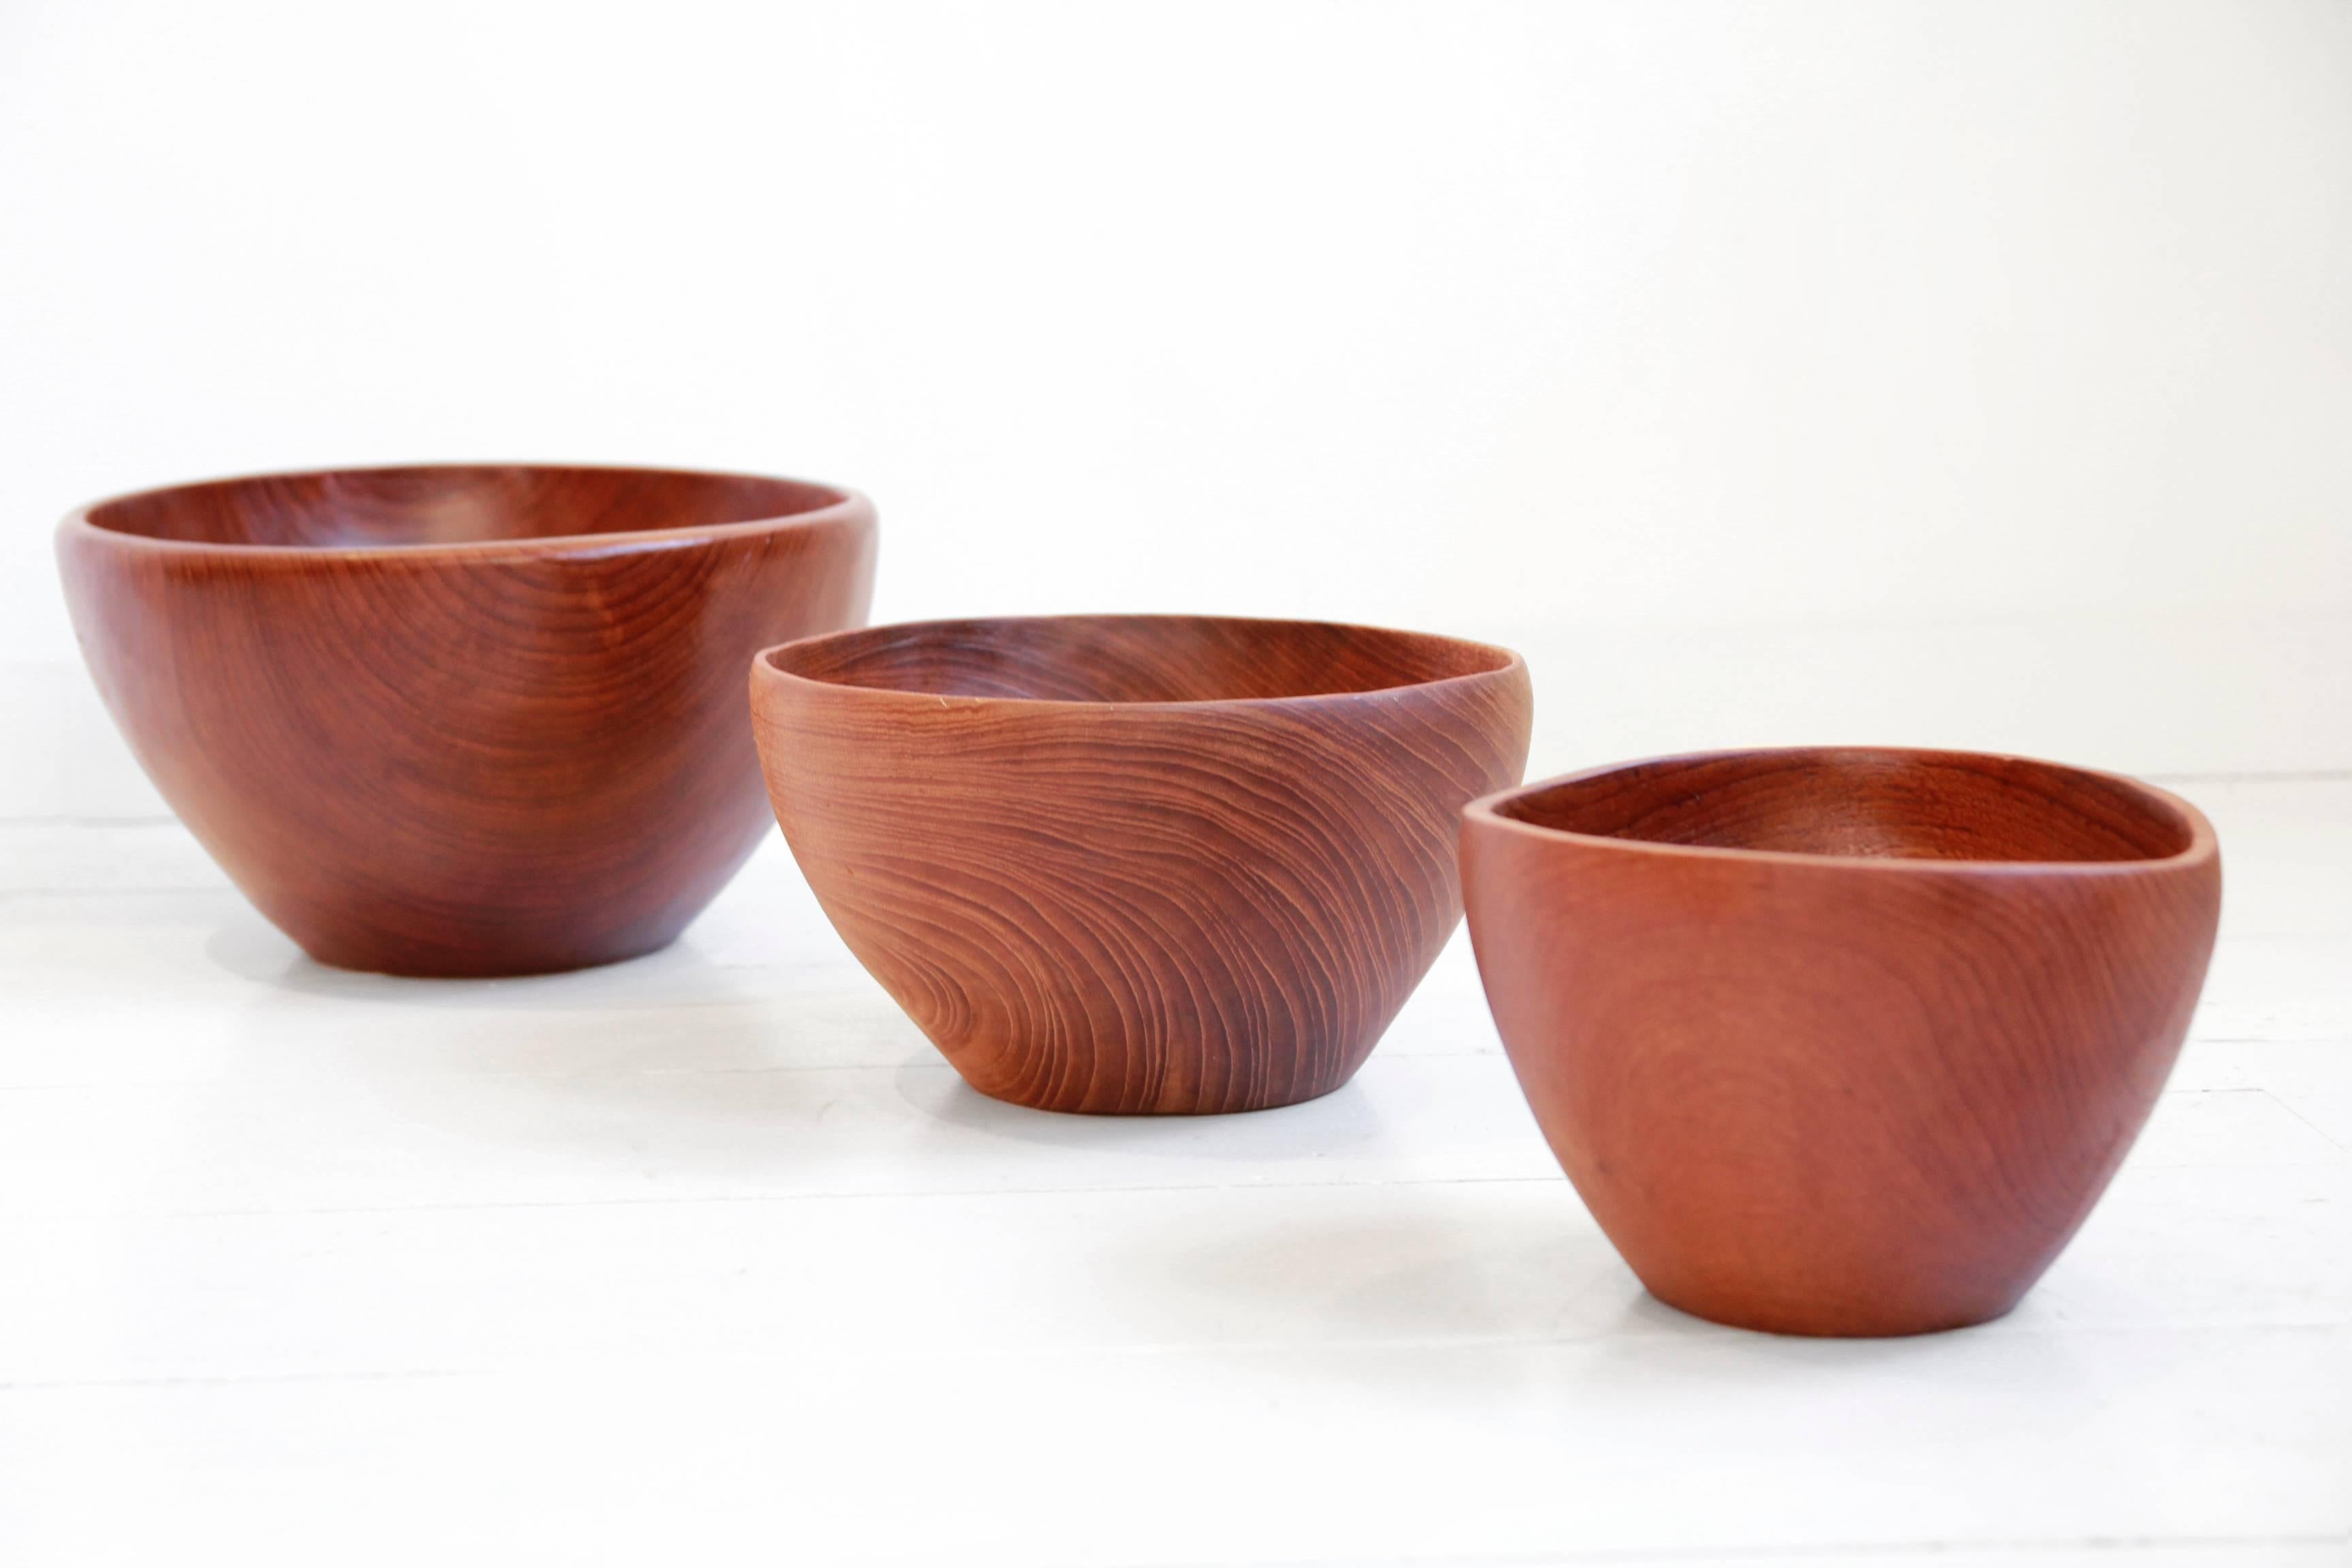 Three sculptural teak bowls from Scandinavian origin, from the 1960s.
It is hard to see the size of the bowl in the picture, but in our opinion they are quite large.
The largest bowl has a diameter of 30 cm and a height of 17 cm.
The middle bowl